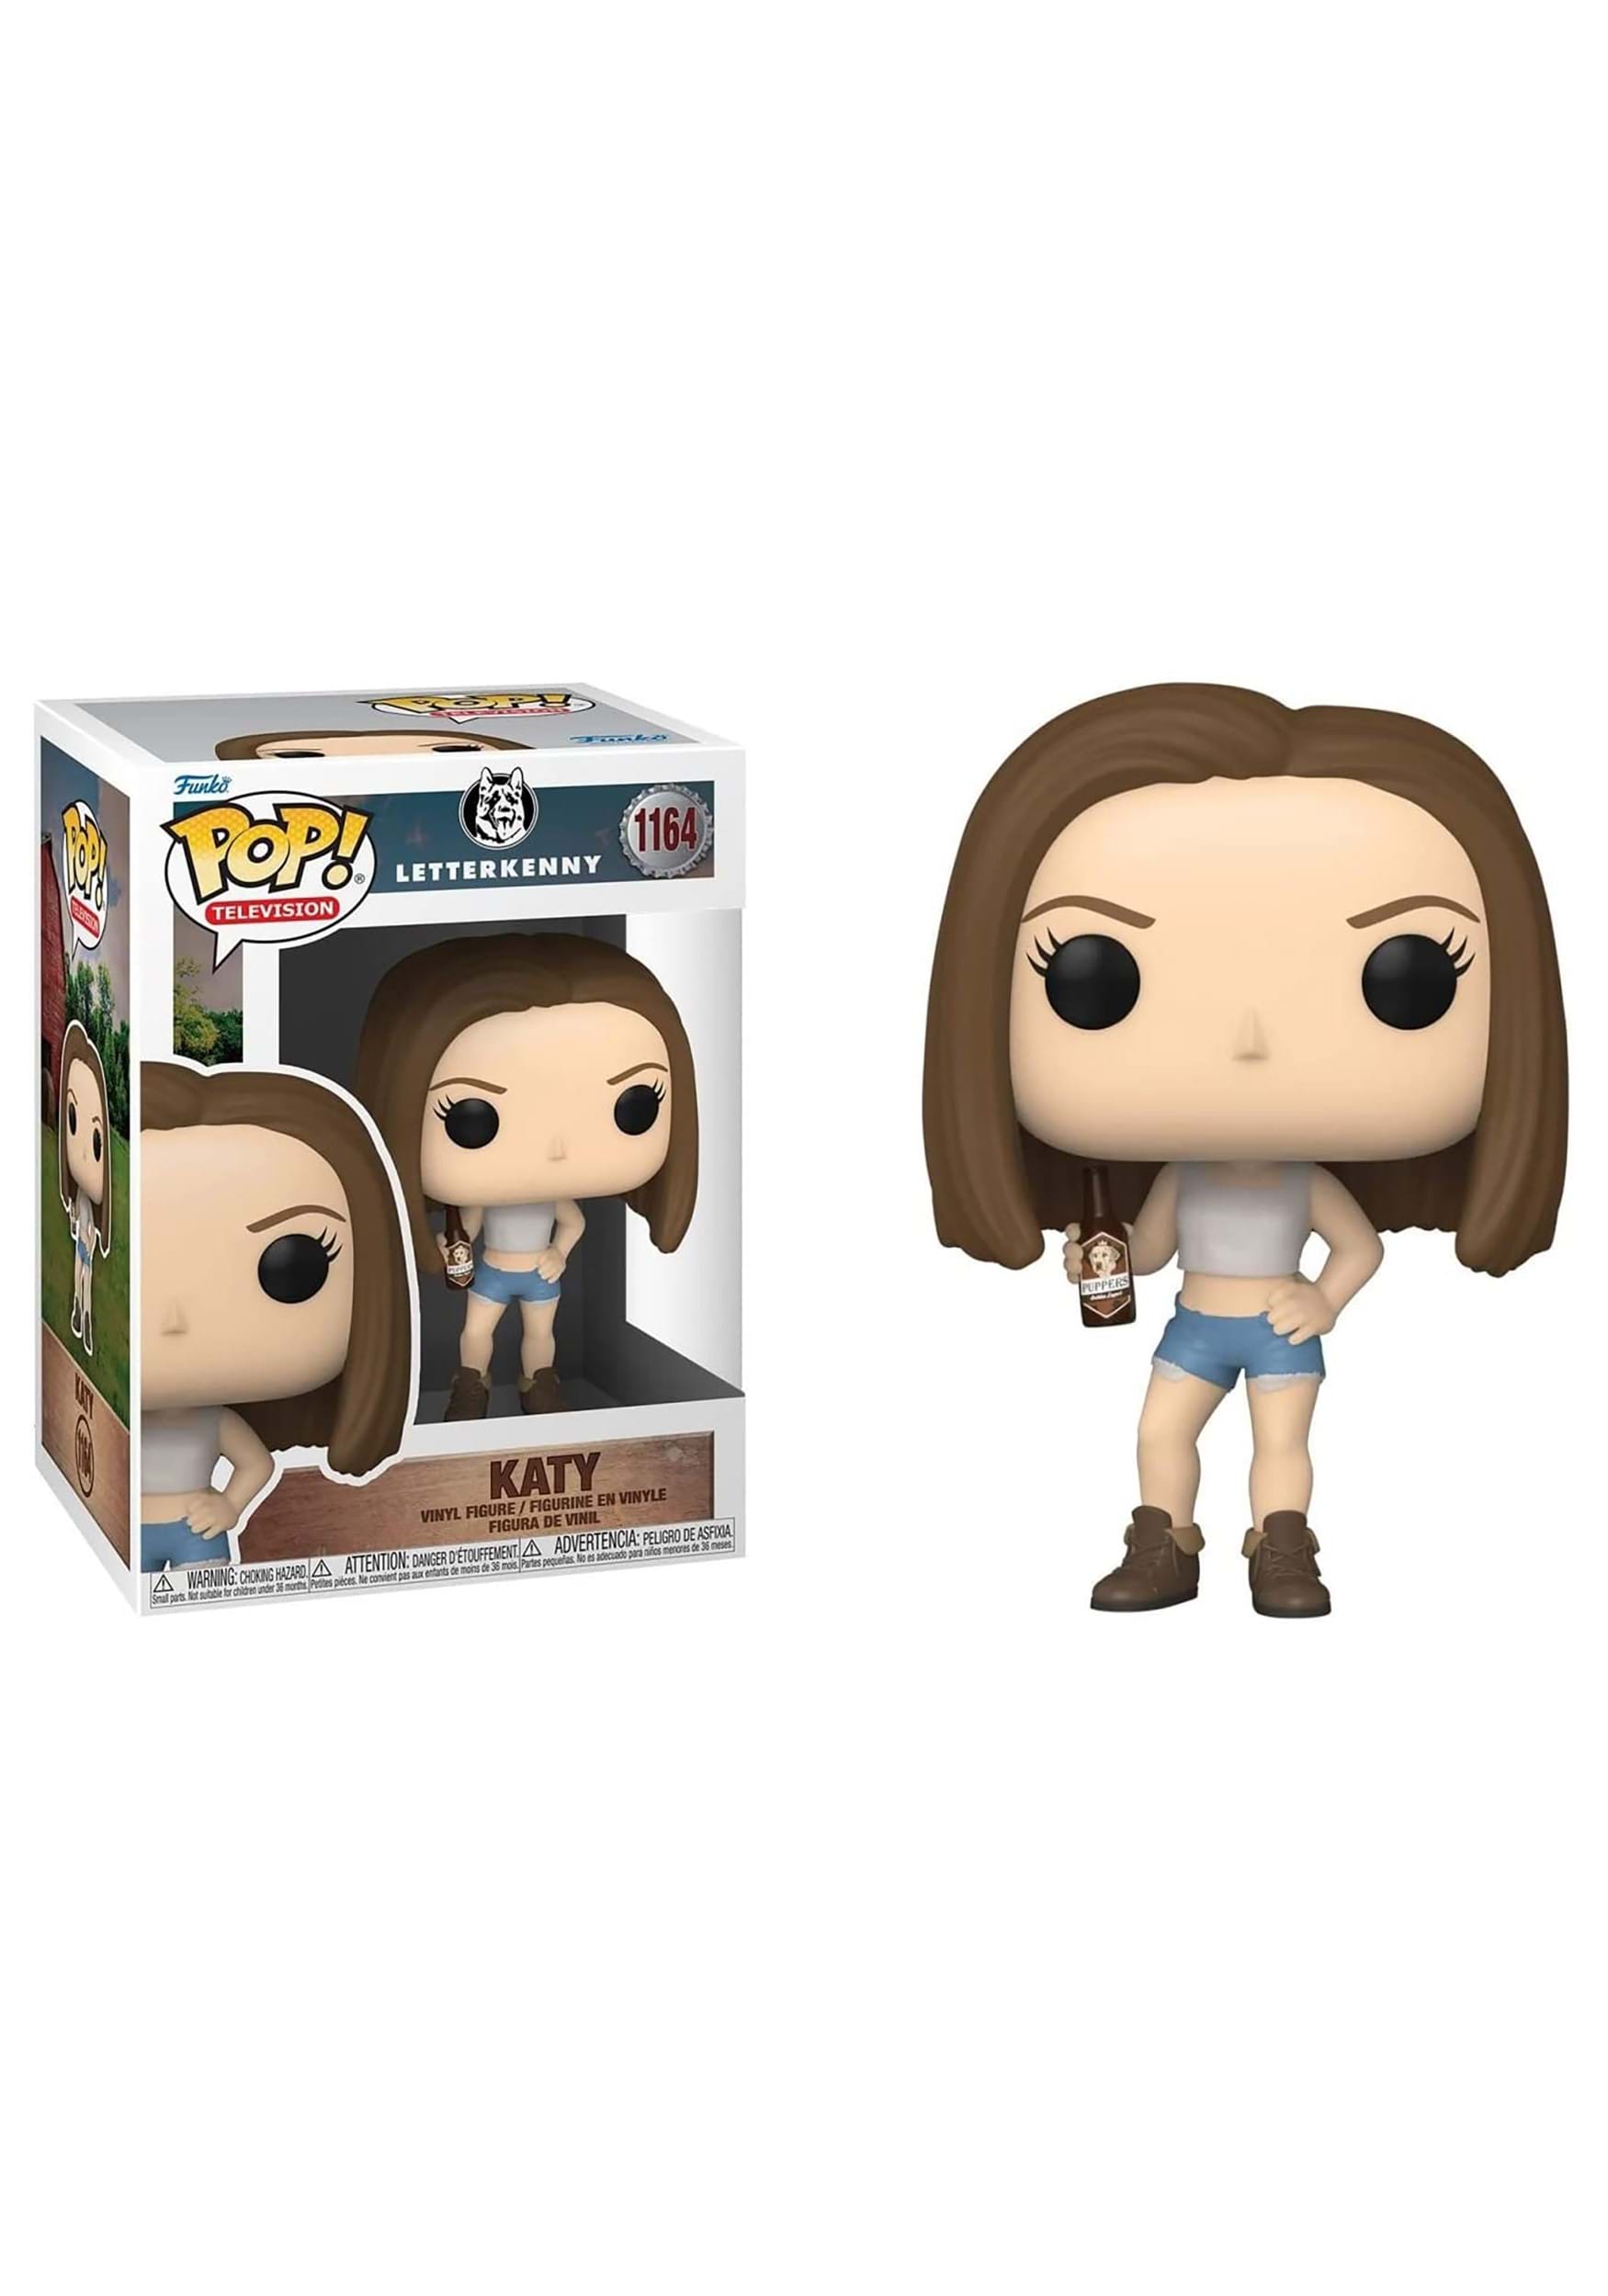 Funko POP! Television: Letterkenny- Katy w/Puppers & Beer